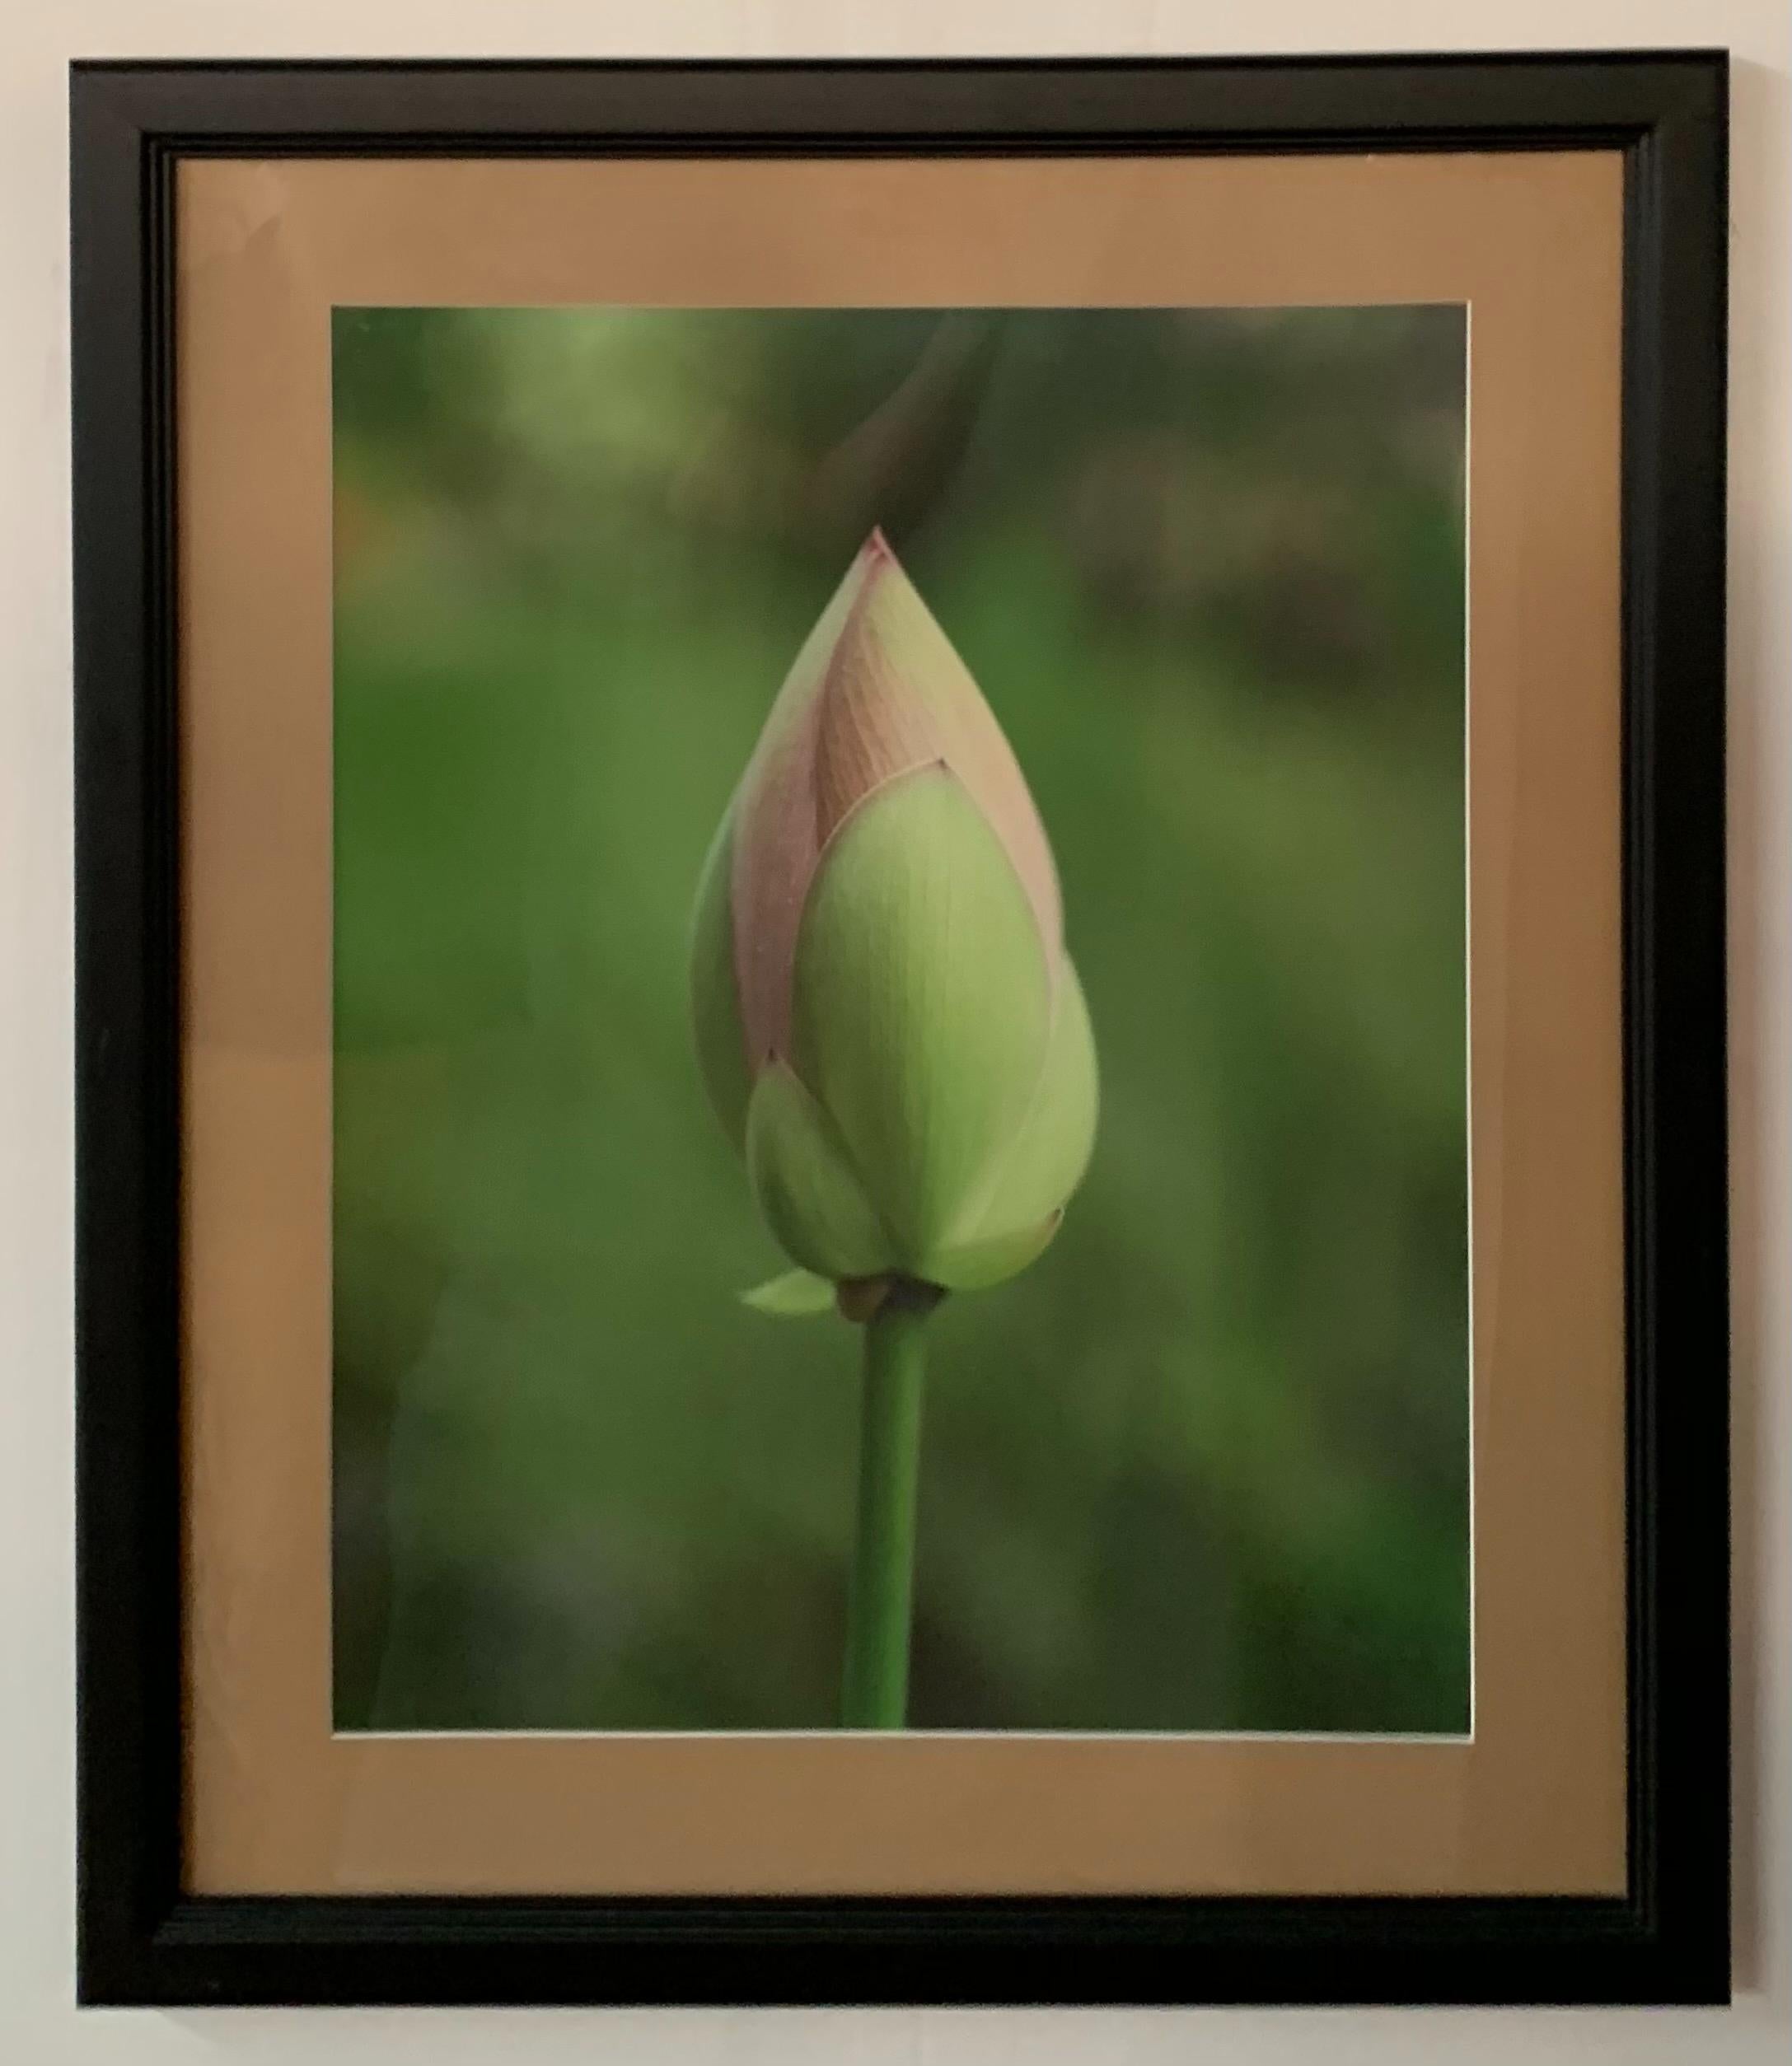 A set of five  photography of a blooming tulip in various stages. Featuring a pink and green colors, aach photography is nicely matted and framed. Unsigned. 

Dimensions: 22.25